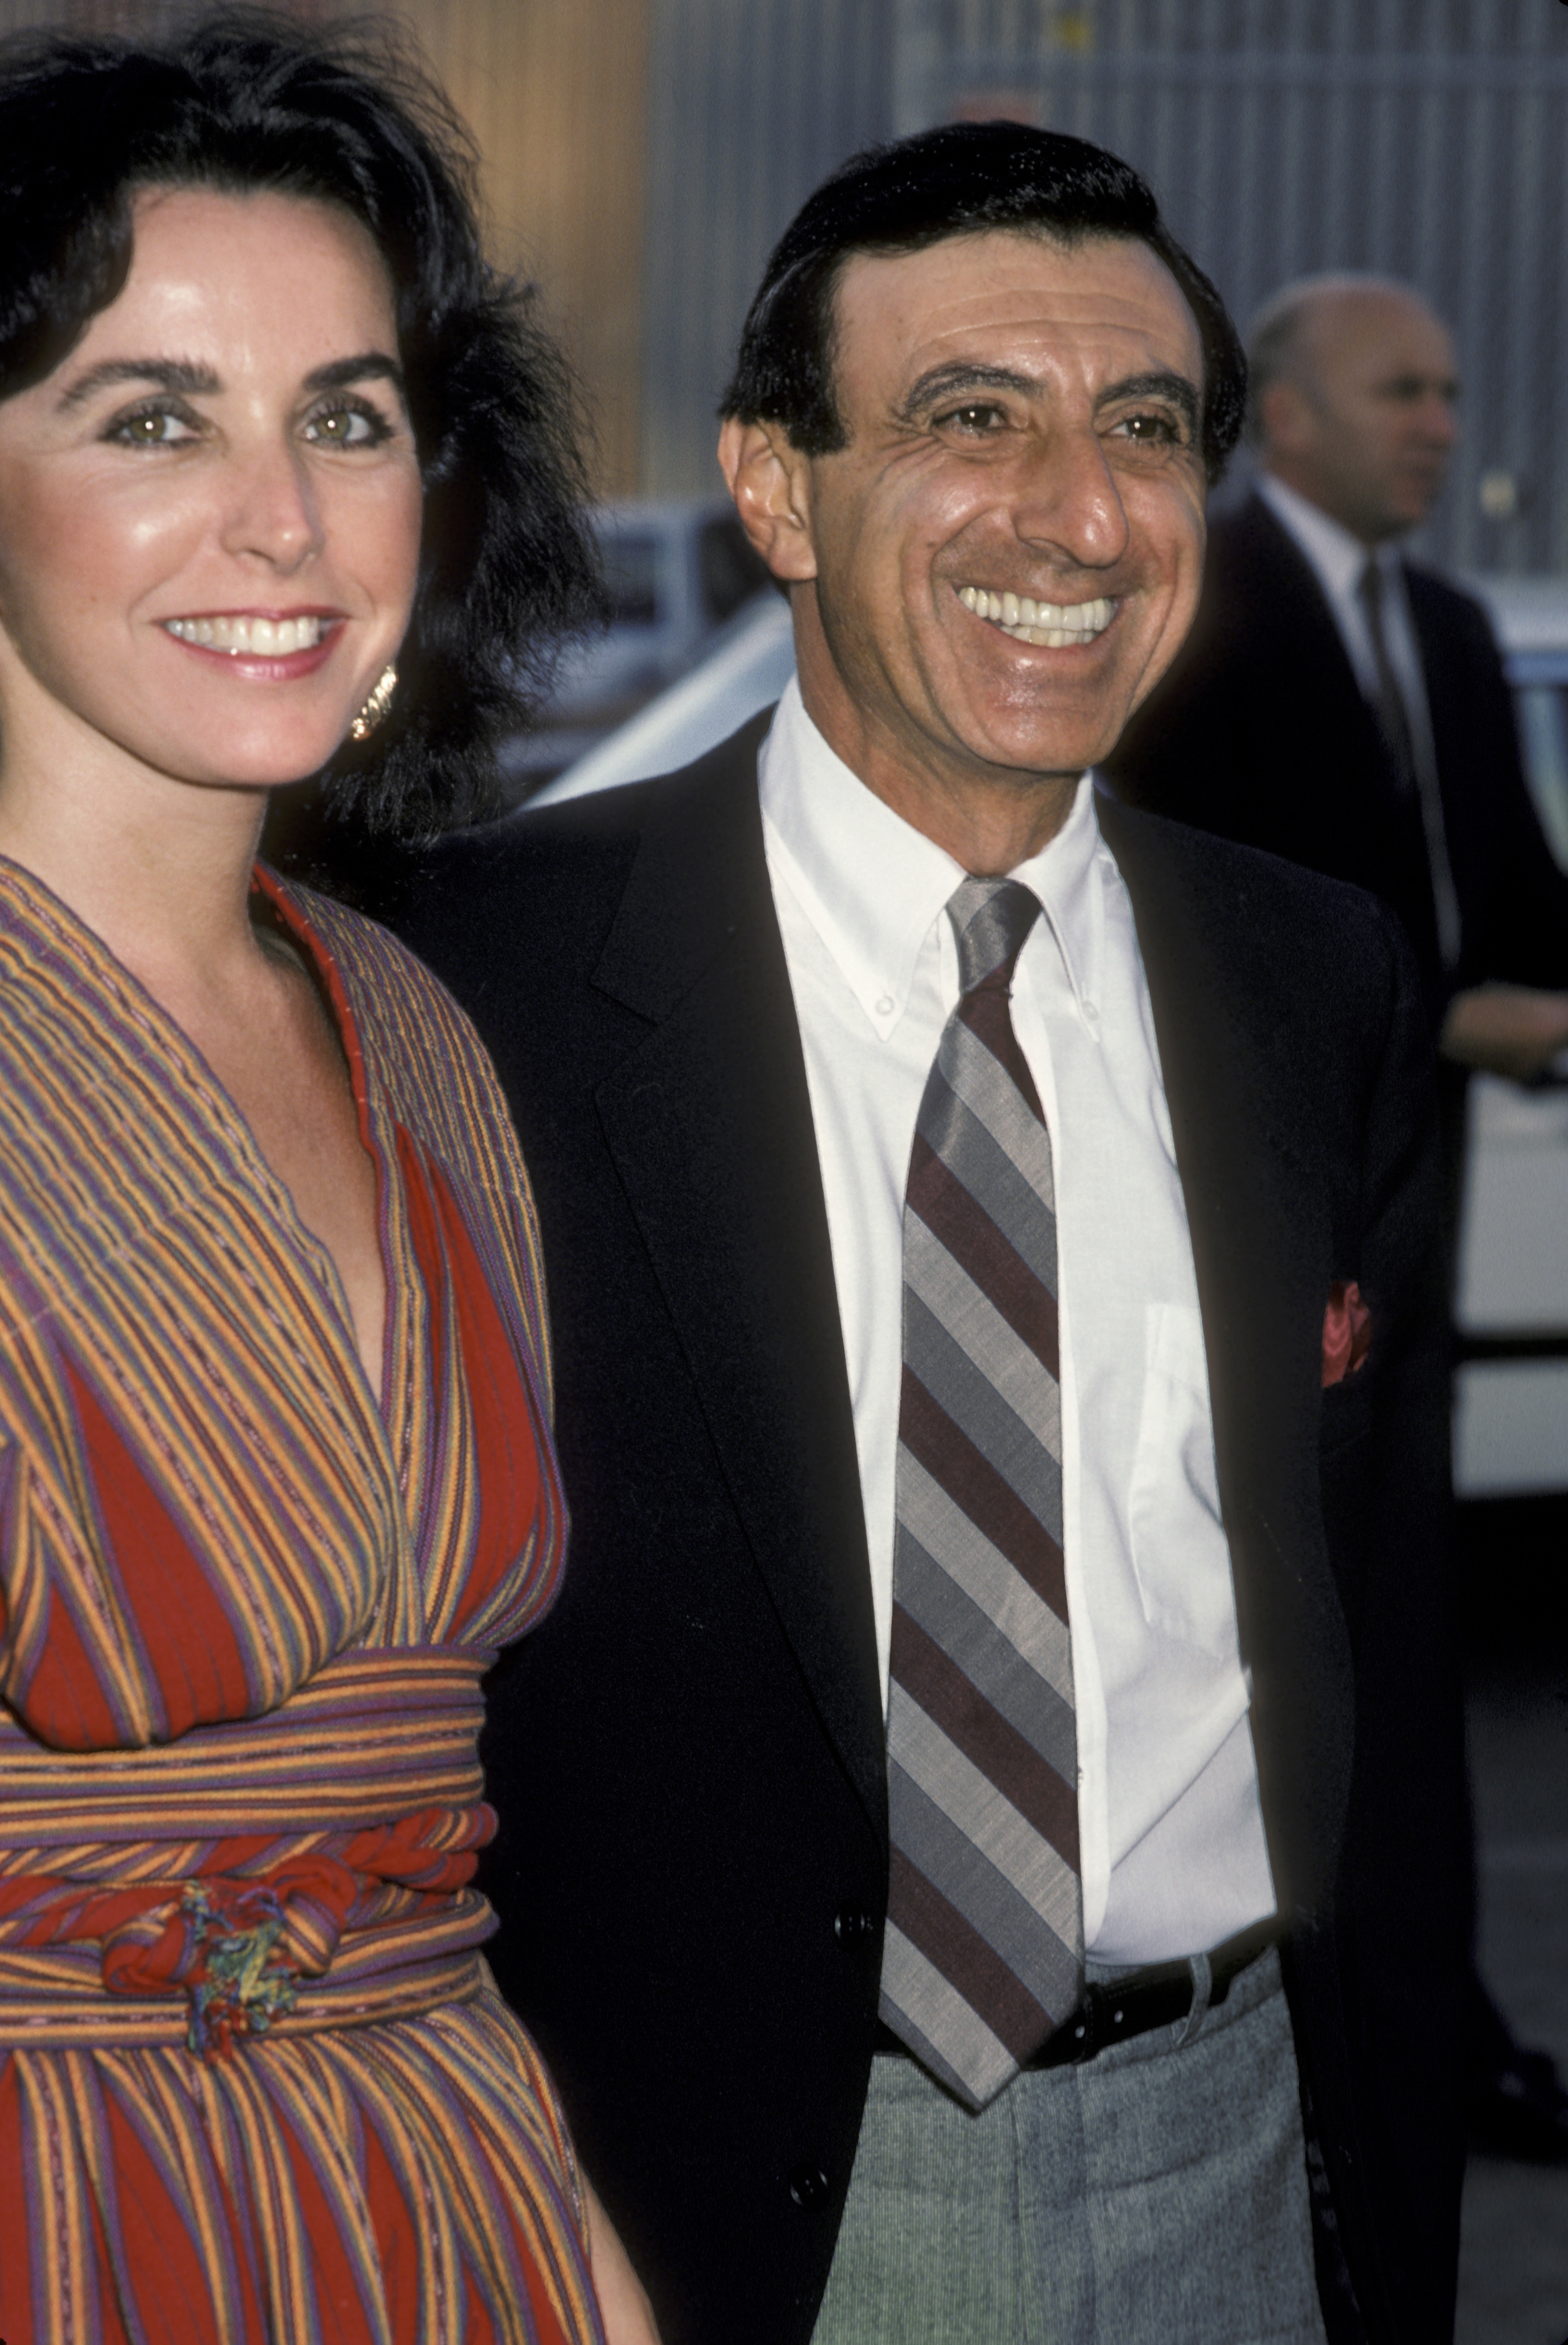 Jamie Farr and Joy Richards attend the 10th Anniversary Party for People Magazine on June 14, 1984 at 20th Century Fox Studios in Century City, California | Source: Getty Images